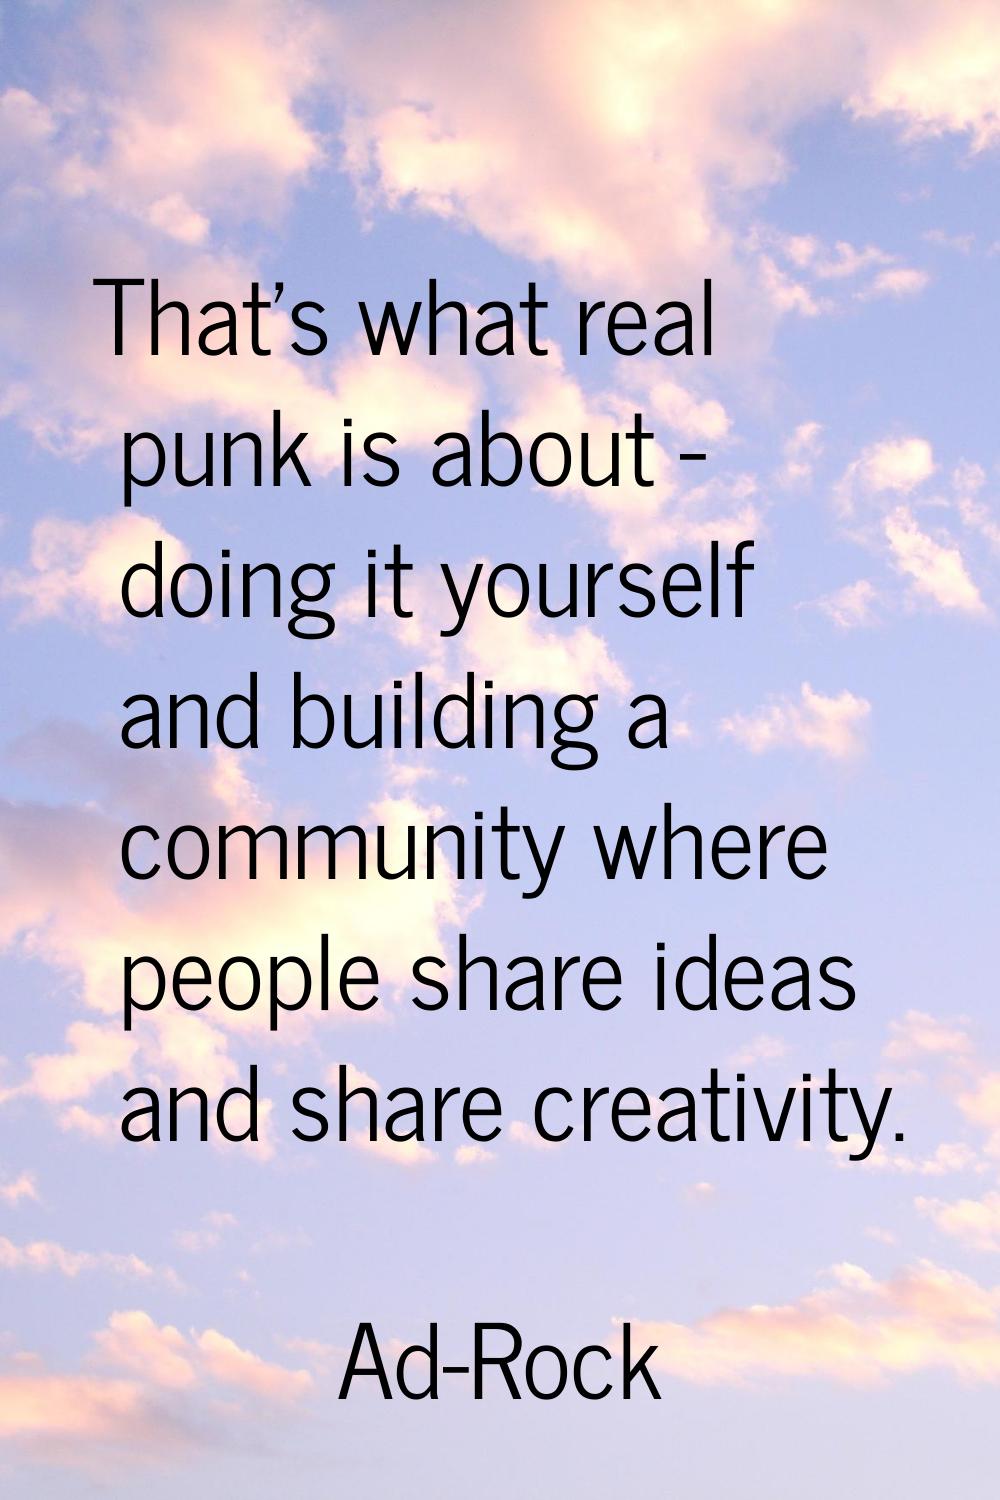 That's what real punk is about - doing it yourself and building a community where people share idea